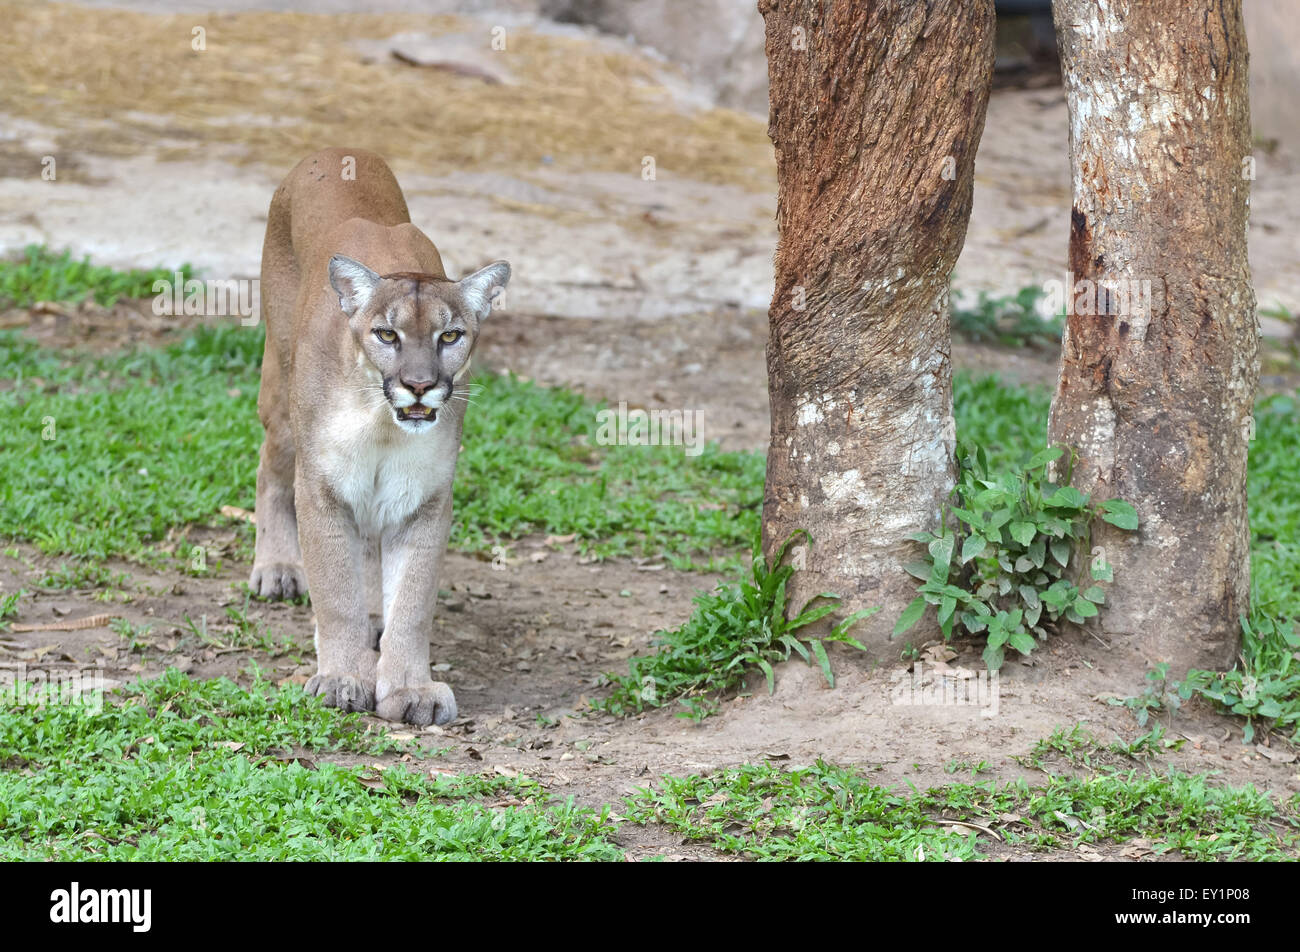 puma or cougar or mountain lion in captive environment Stock Photo - Alamy